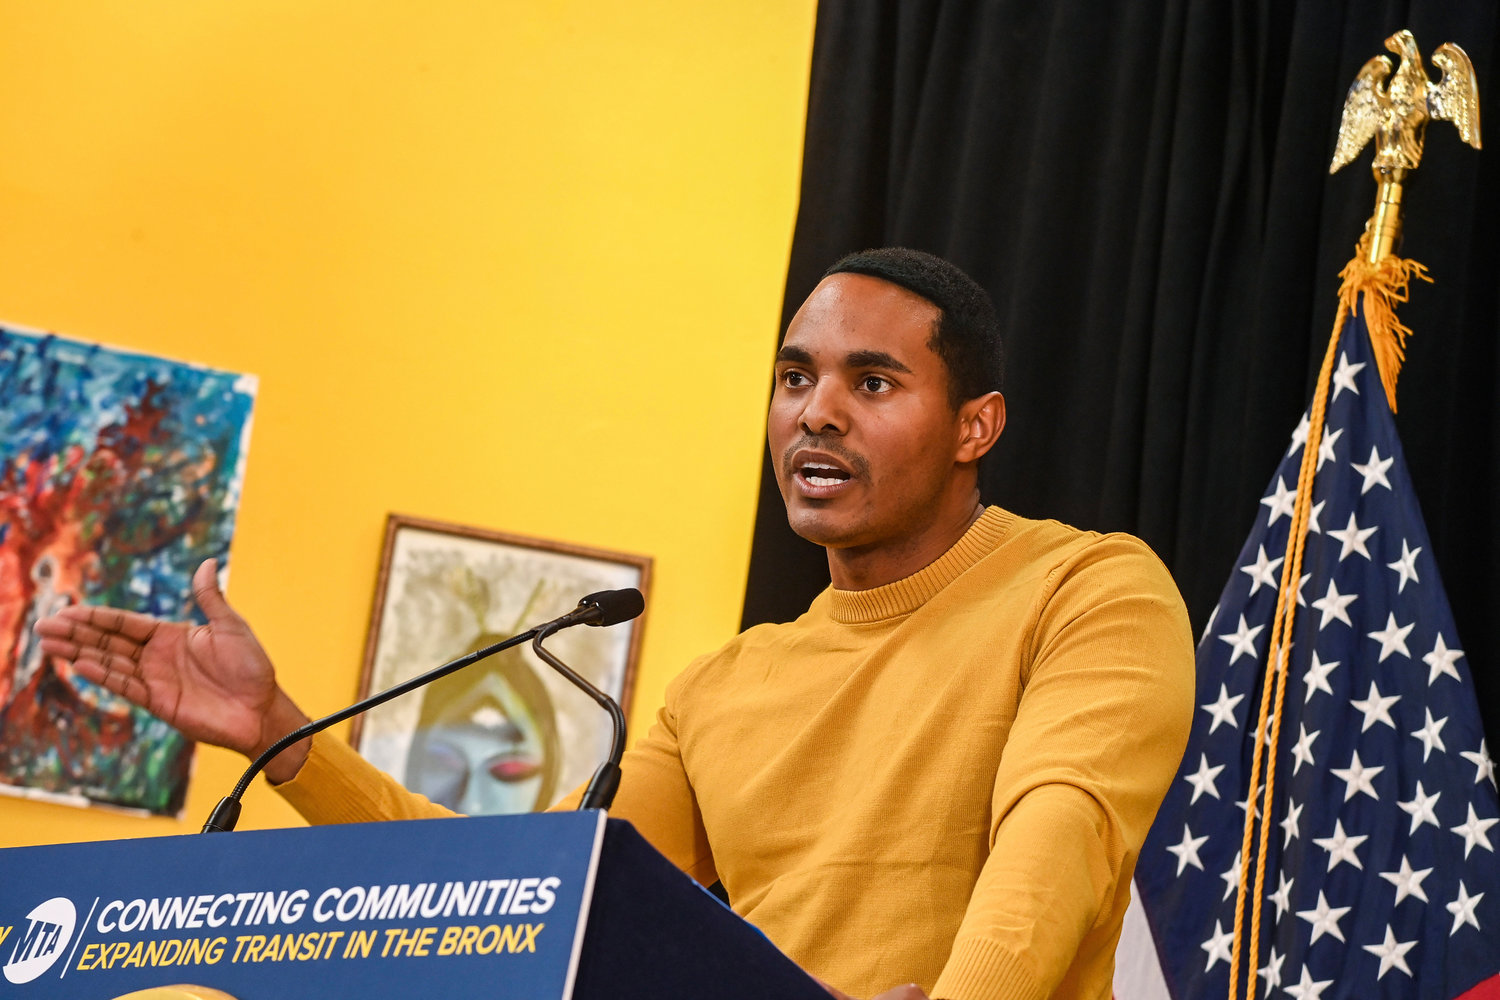 U.S. Rep. Ritchie Torres, shown at a press conference for the MTA projects in the Bronx last year, has taken a hard stance against fellow incoming Long Island Rep.-elect George Santos, who has been accused of lying on his resume during his successful campaign.